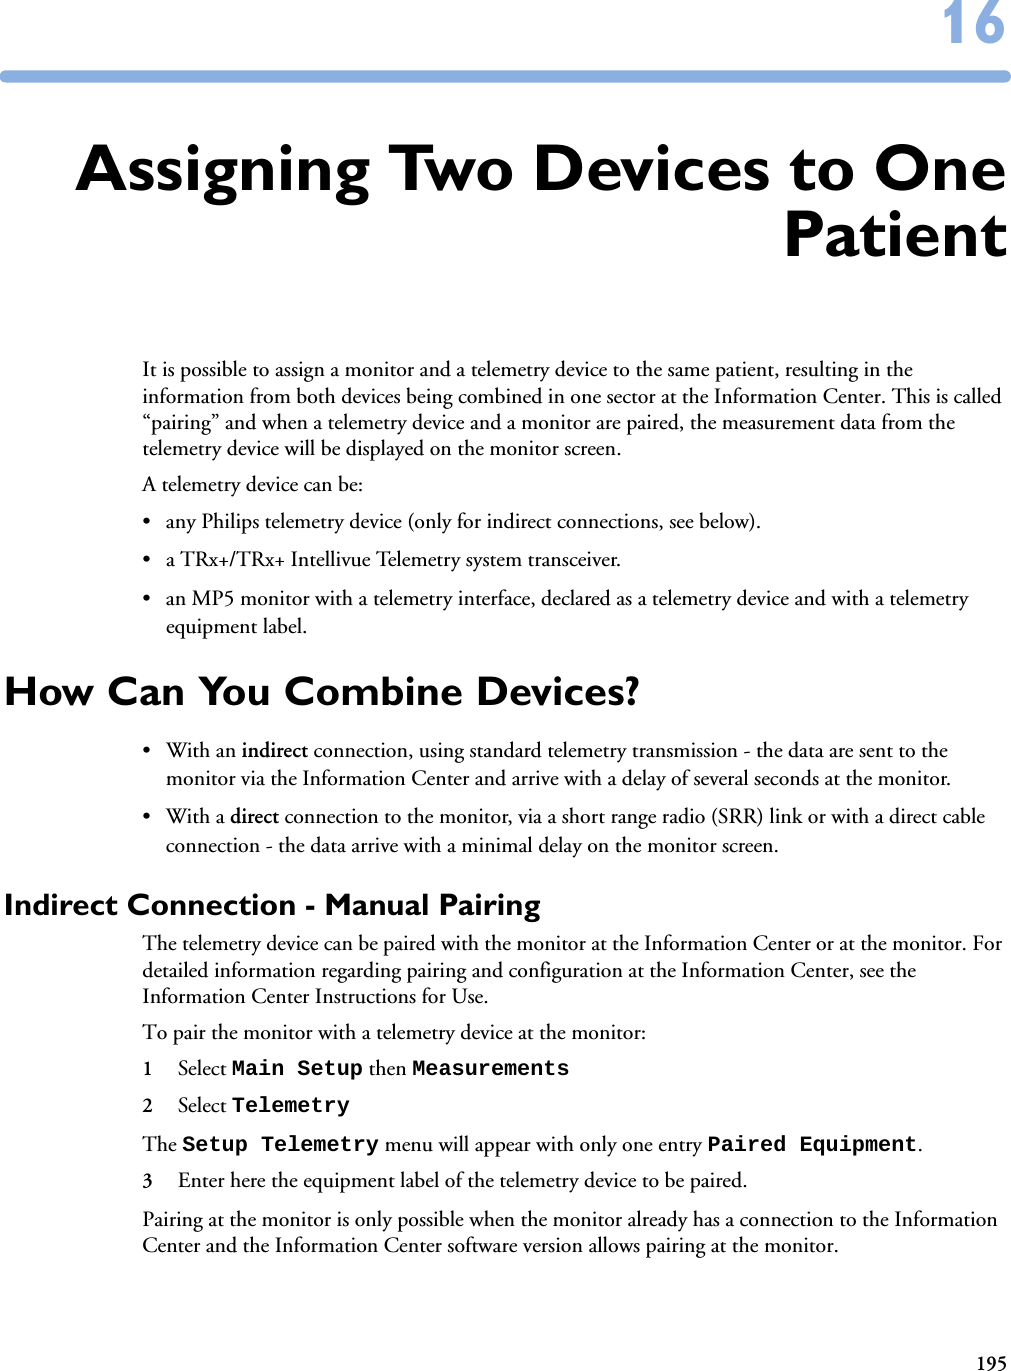 1951616Assigning Two Devices to OnePatientIt is possible to assign a monitor and a telemetry device to the same patient, resulting in the information from both devices being combined in one sector at the Information Center. This is called “pairing” and when a telemetry device and a monitor are paired, the measurement data from the telemetry device will be displayed on the monitor screen. A telemetry device can be:• any Philips telemetry device (only for indirect connections, see below).• a TRx+/TRx+ Intellivue Telemetry system transceiver.• an MP5 monitor with a telemetry interface, declared as a telemetry device and with a telemetry equipment label.How Can You Combine Devices?•With an indirect connection, using standard telemetry transmission - the data are sent to the monitor via the Information Center and arrive with a delay of several seconds at the monitor. •With a direct connection to the monitor, via a short range radio (SRR) link or with a direct cable connection - the data arrive with a minimal delay on the monitor screen.Indirect Connection - Manual PairingThe telemetry device can be paired with the monitor at the Information Center or at the monitor. For detailed information regarding pairing and configuration at the Information Center, see the Information Center Instructions for Use.To pair the monitor with a telemetry device at the monitor:1Select Main Setup then Measurements 2Select Telemetry The Setup Telemetry menu will appear with only one entry Paired Equipment.3Enter here the equipment label of the telemetry device to be paired. Pairing at the monitor is only possible when the monitor already has a connection to the Information Center and the Information Center software version allows pairing at the monitor.